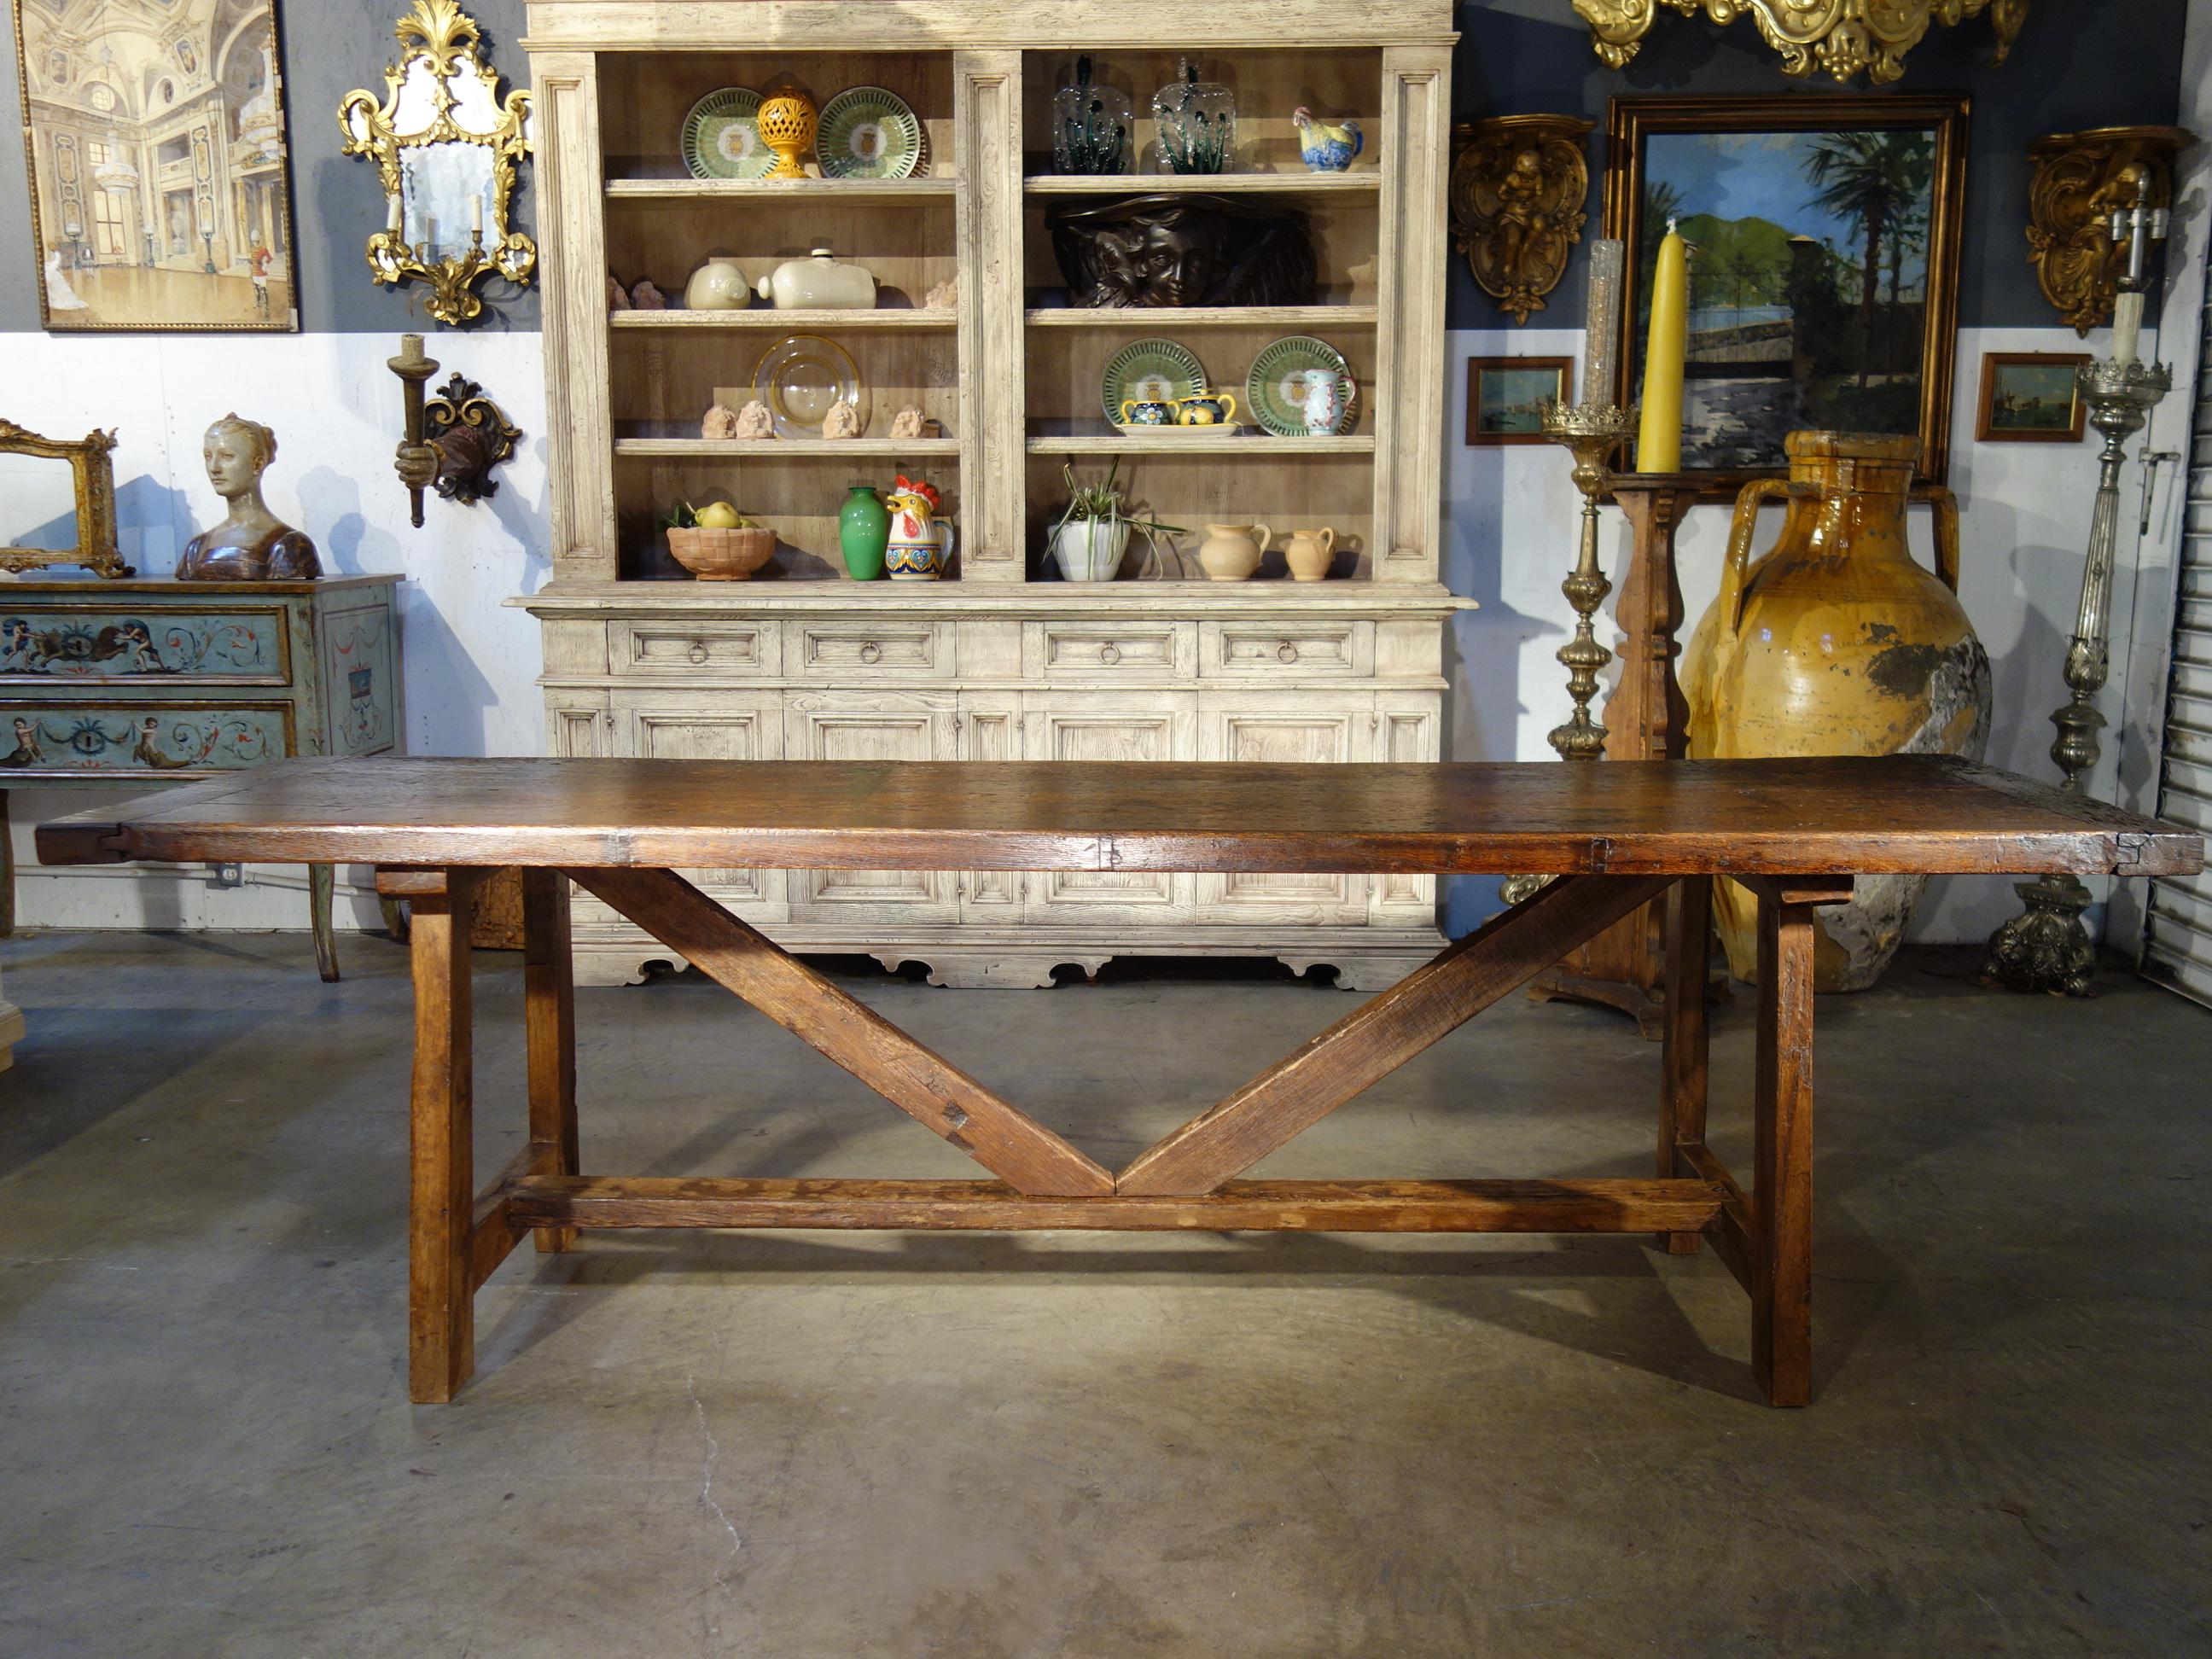 Late 17th Century Italian chestnut Frattino style antique trestle table features 2 ancient solid top planks with end frames, trestle base crosspieces and forged iron joinery pins. With is superior details including dovetail joinery,  present a fine